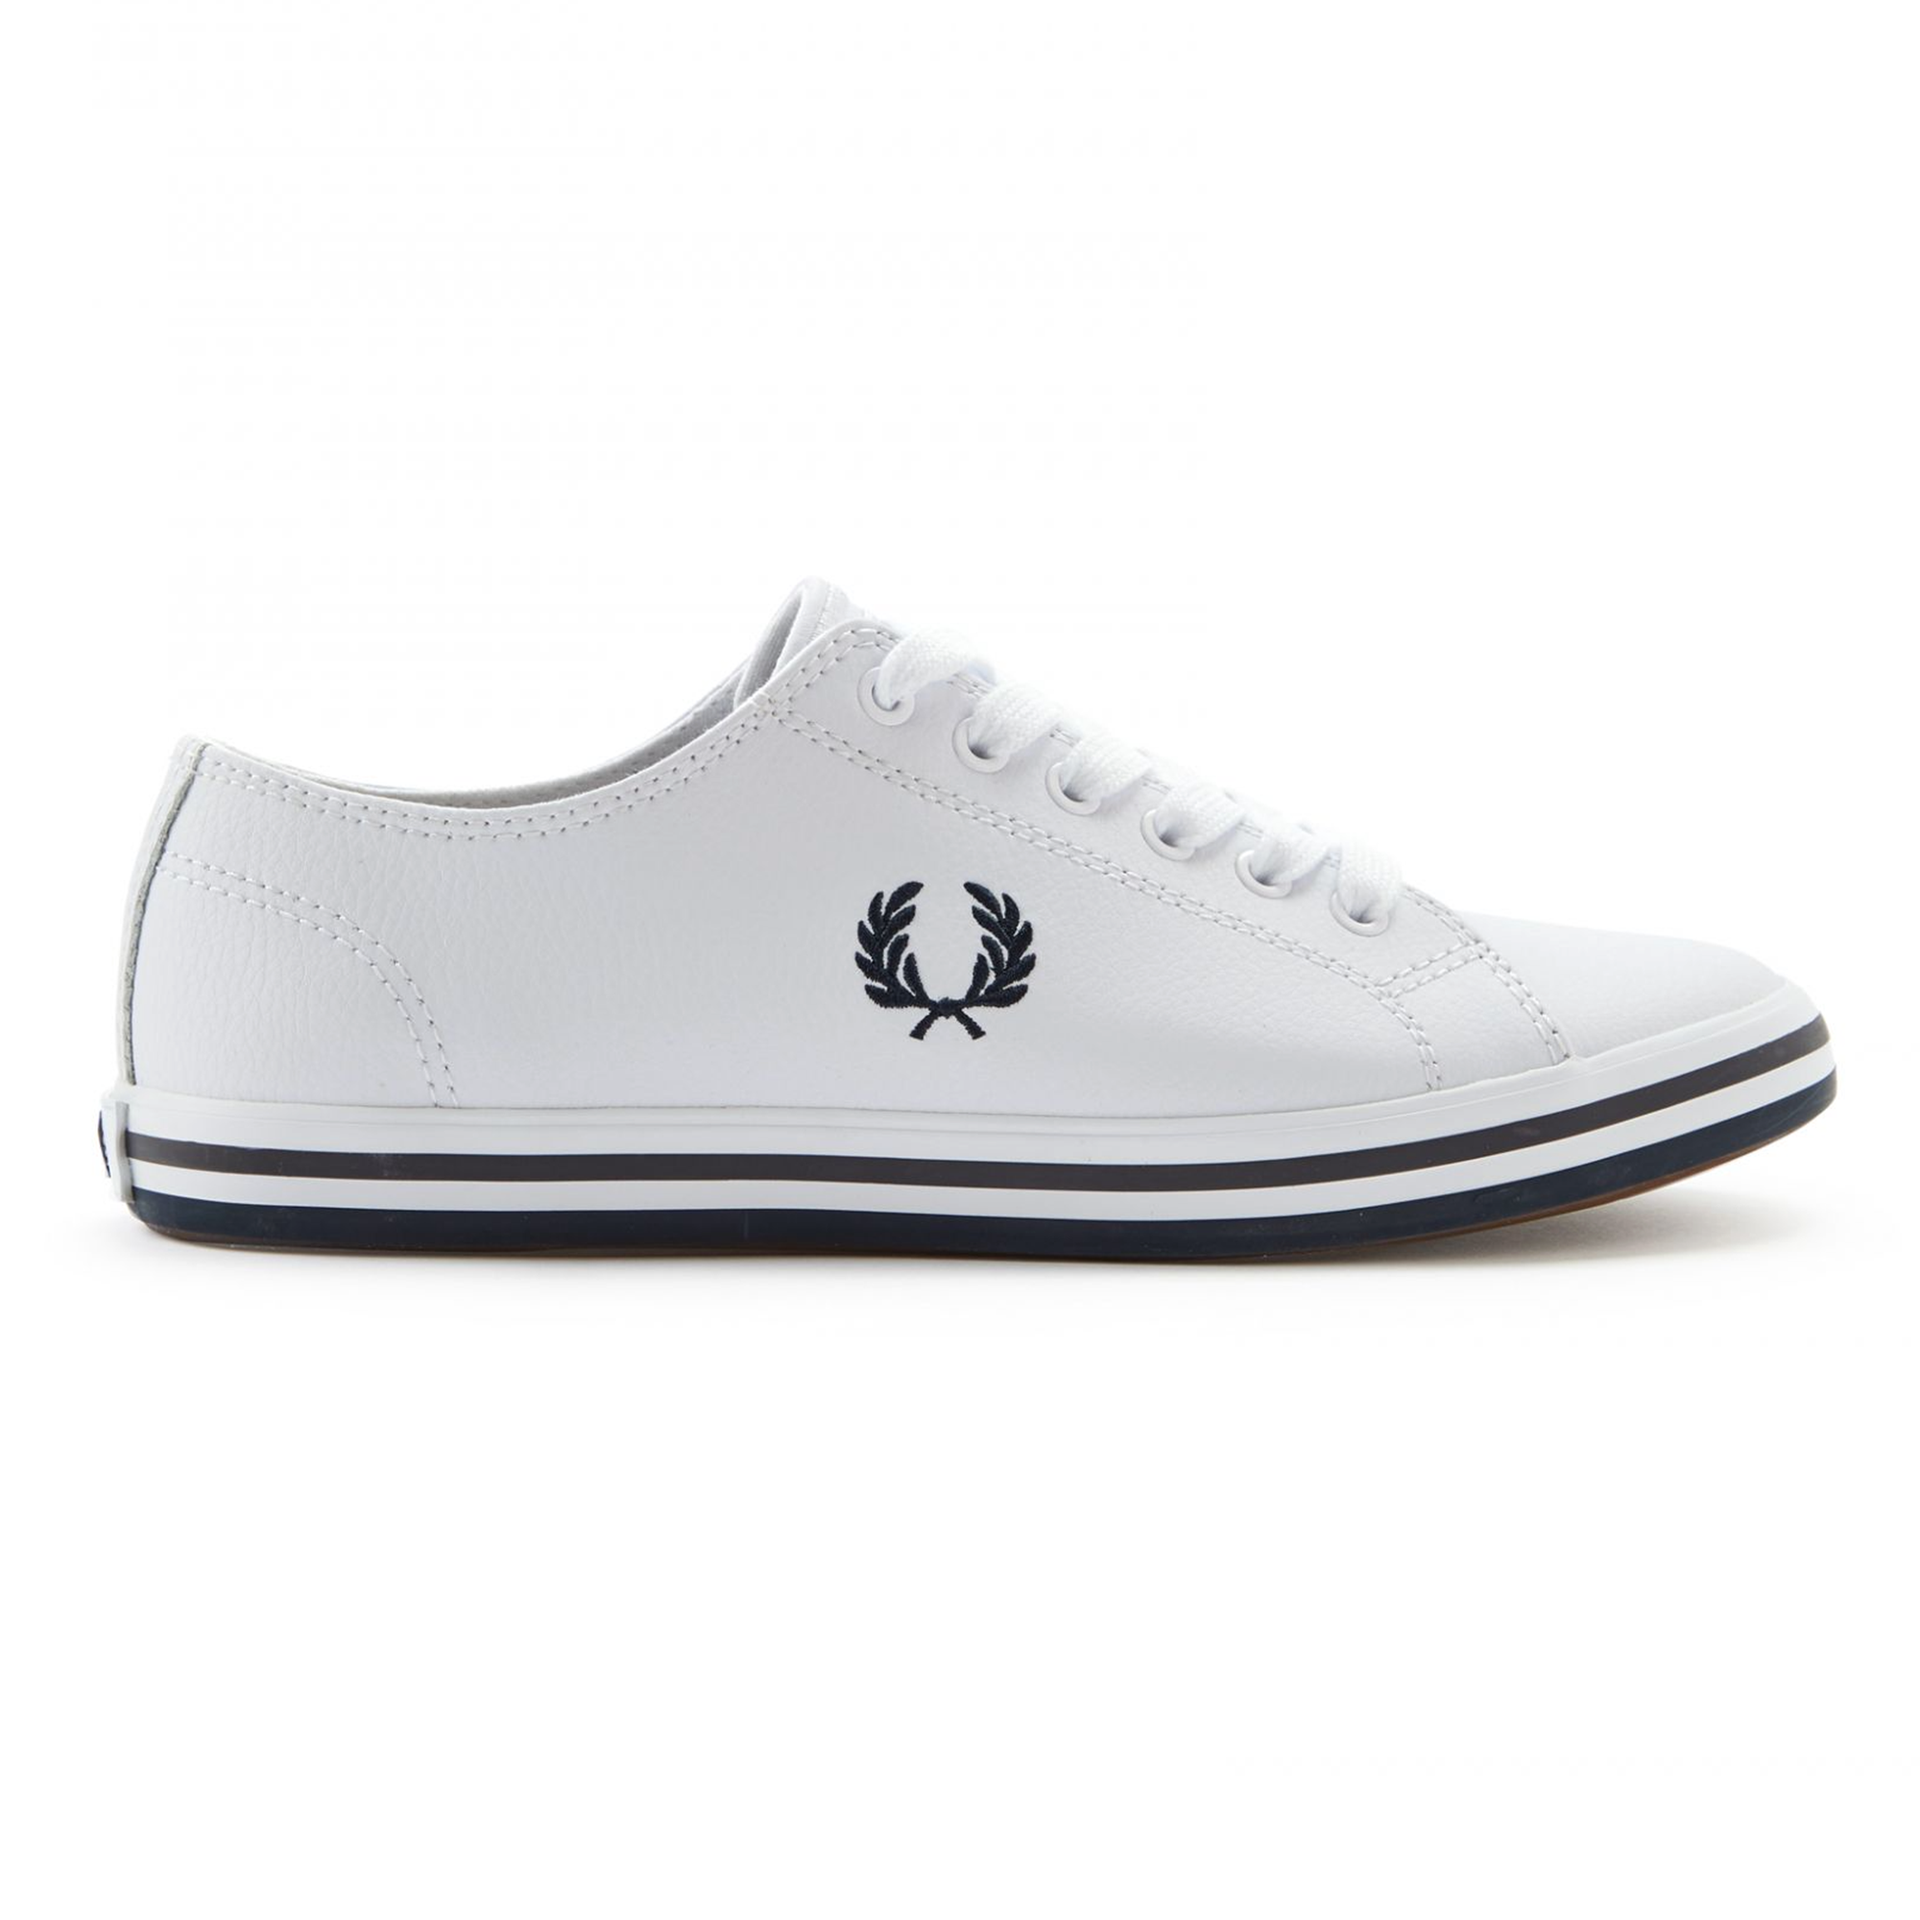 FRED PERRY KINGSTON LEATHER SHOES